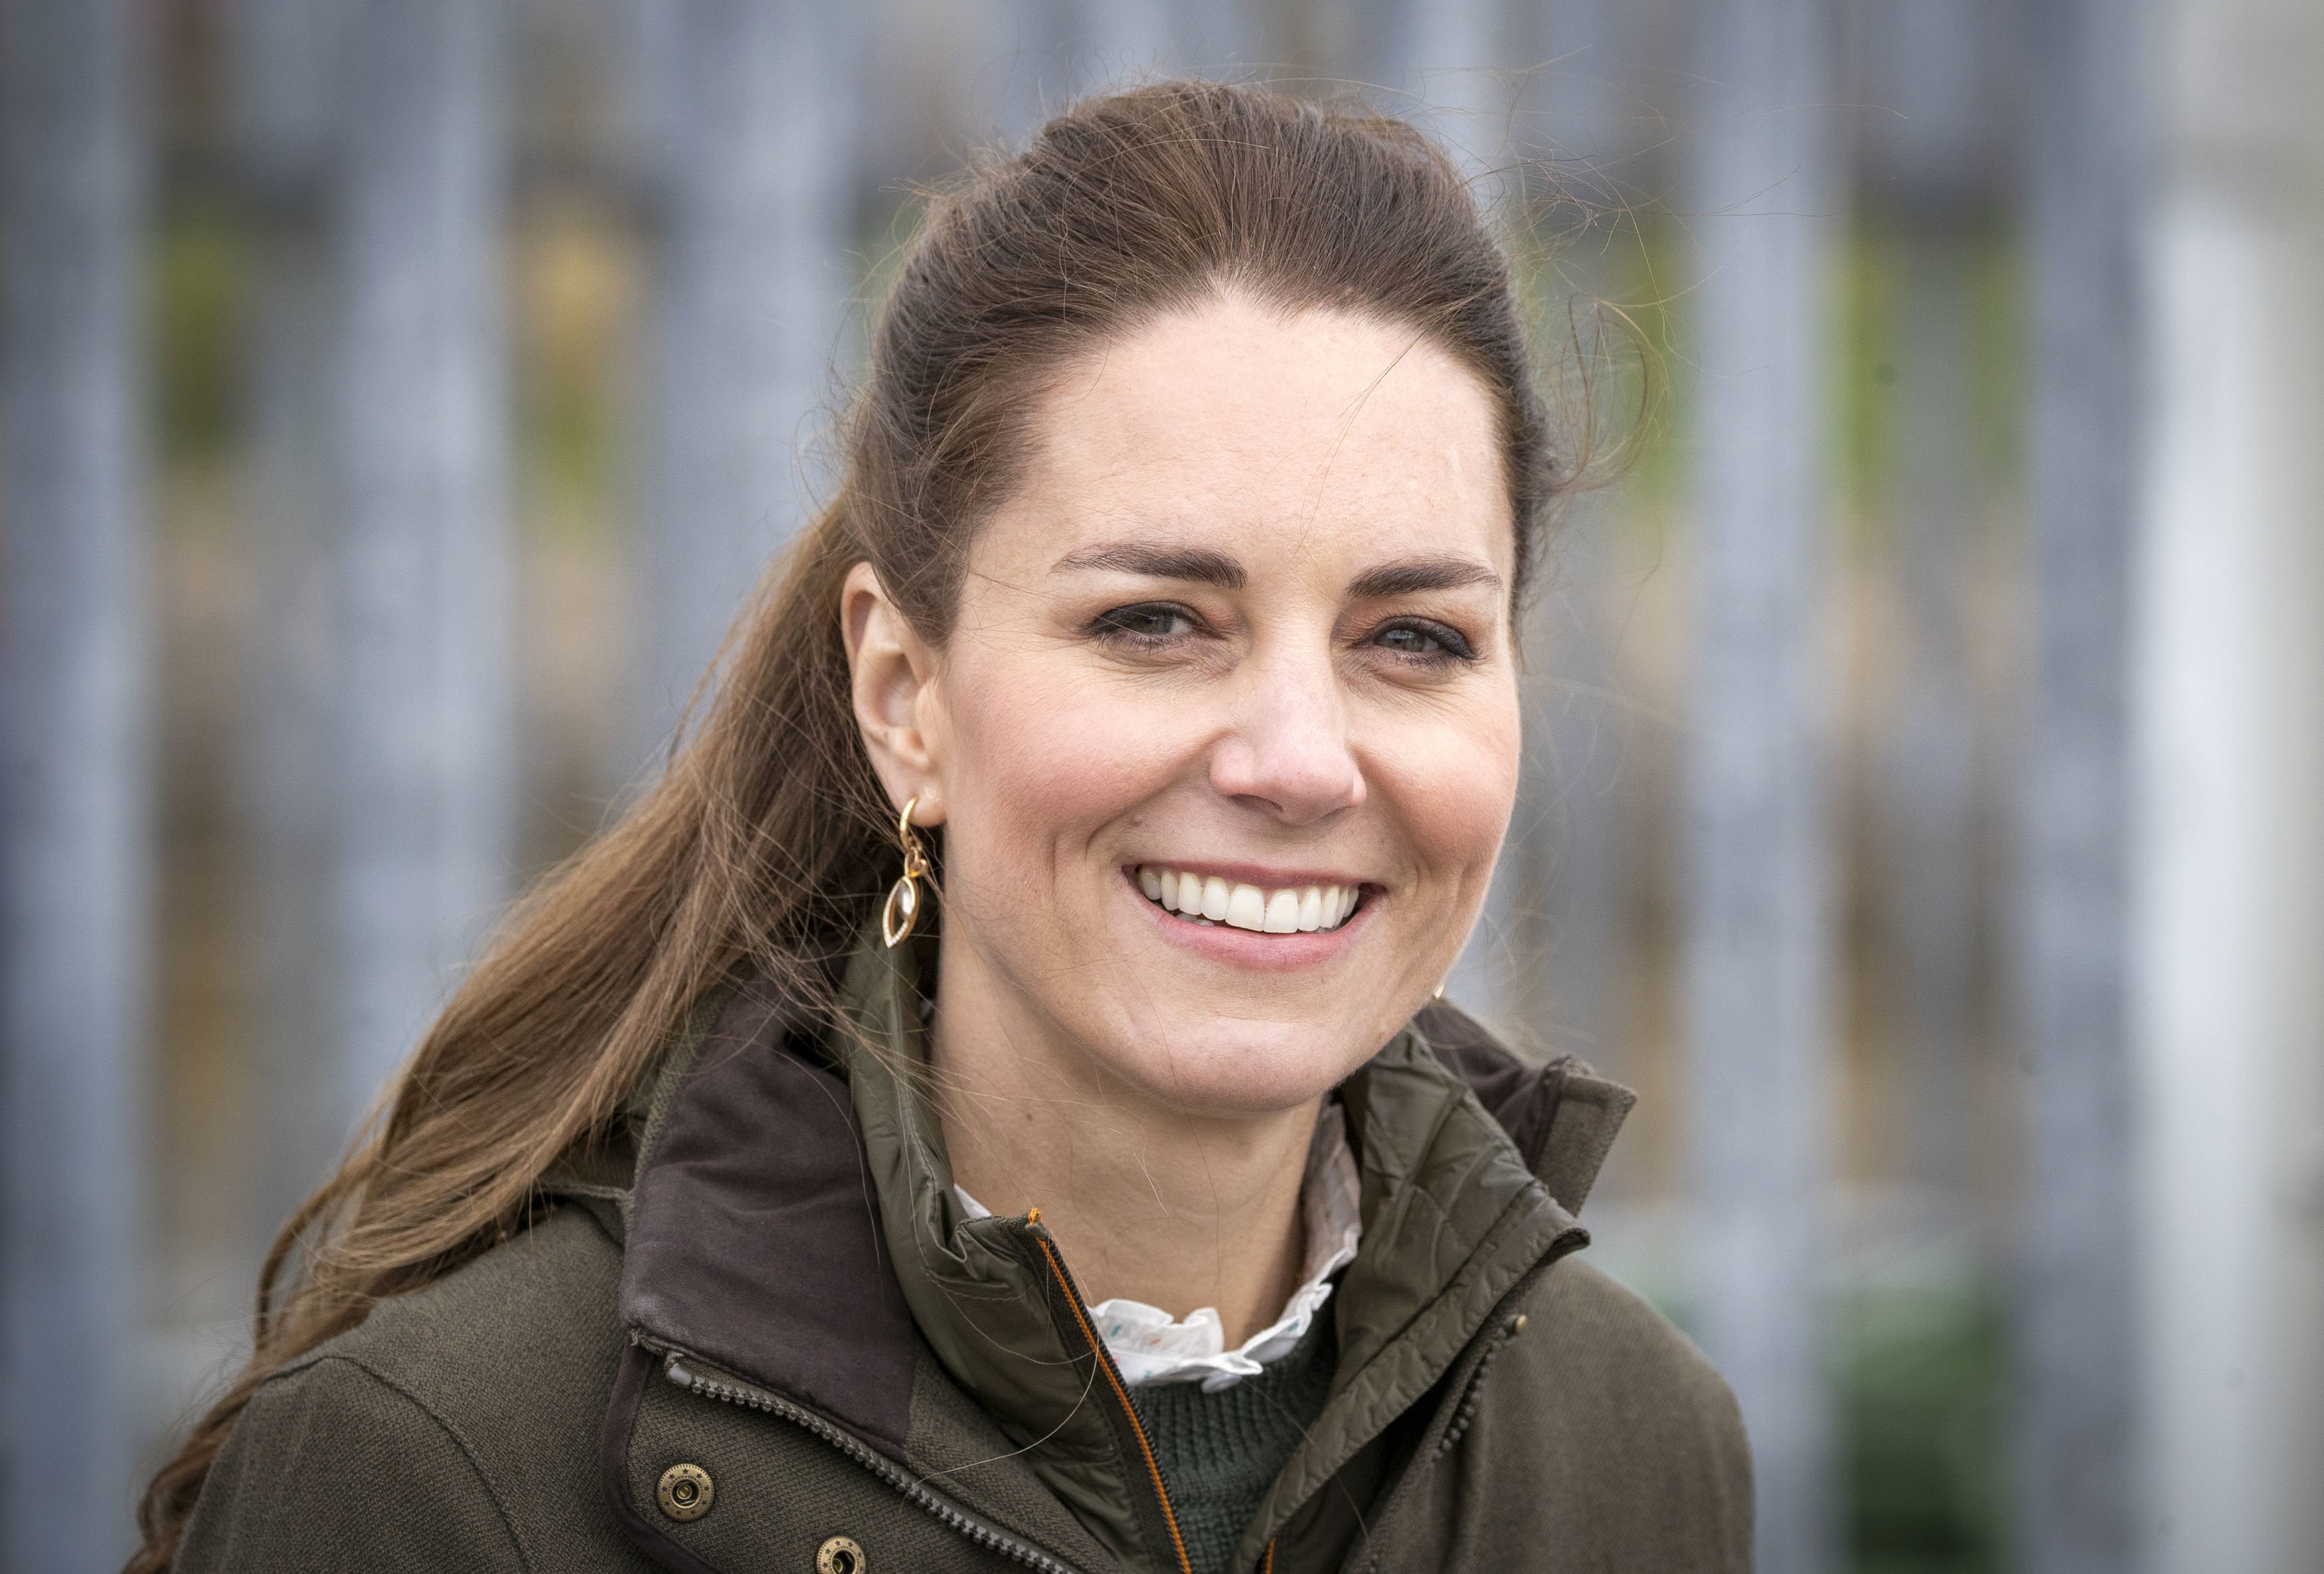 Catherine, Duchess of Cambridge during a visit to the European Marine Energy Centre on May 25, 2021. | Photo: Getty Images